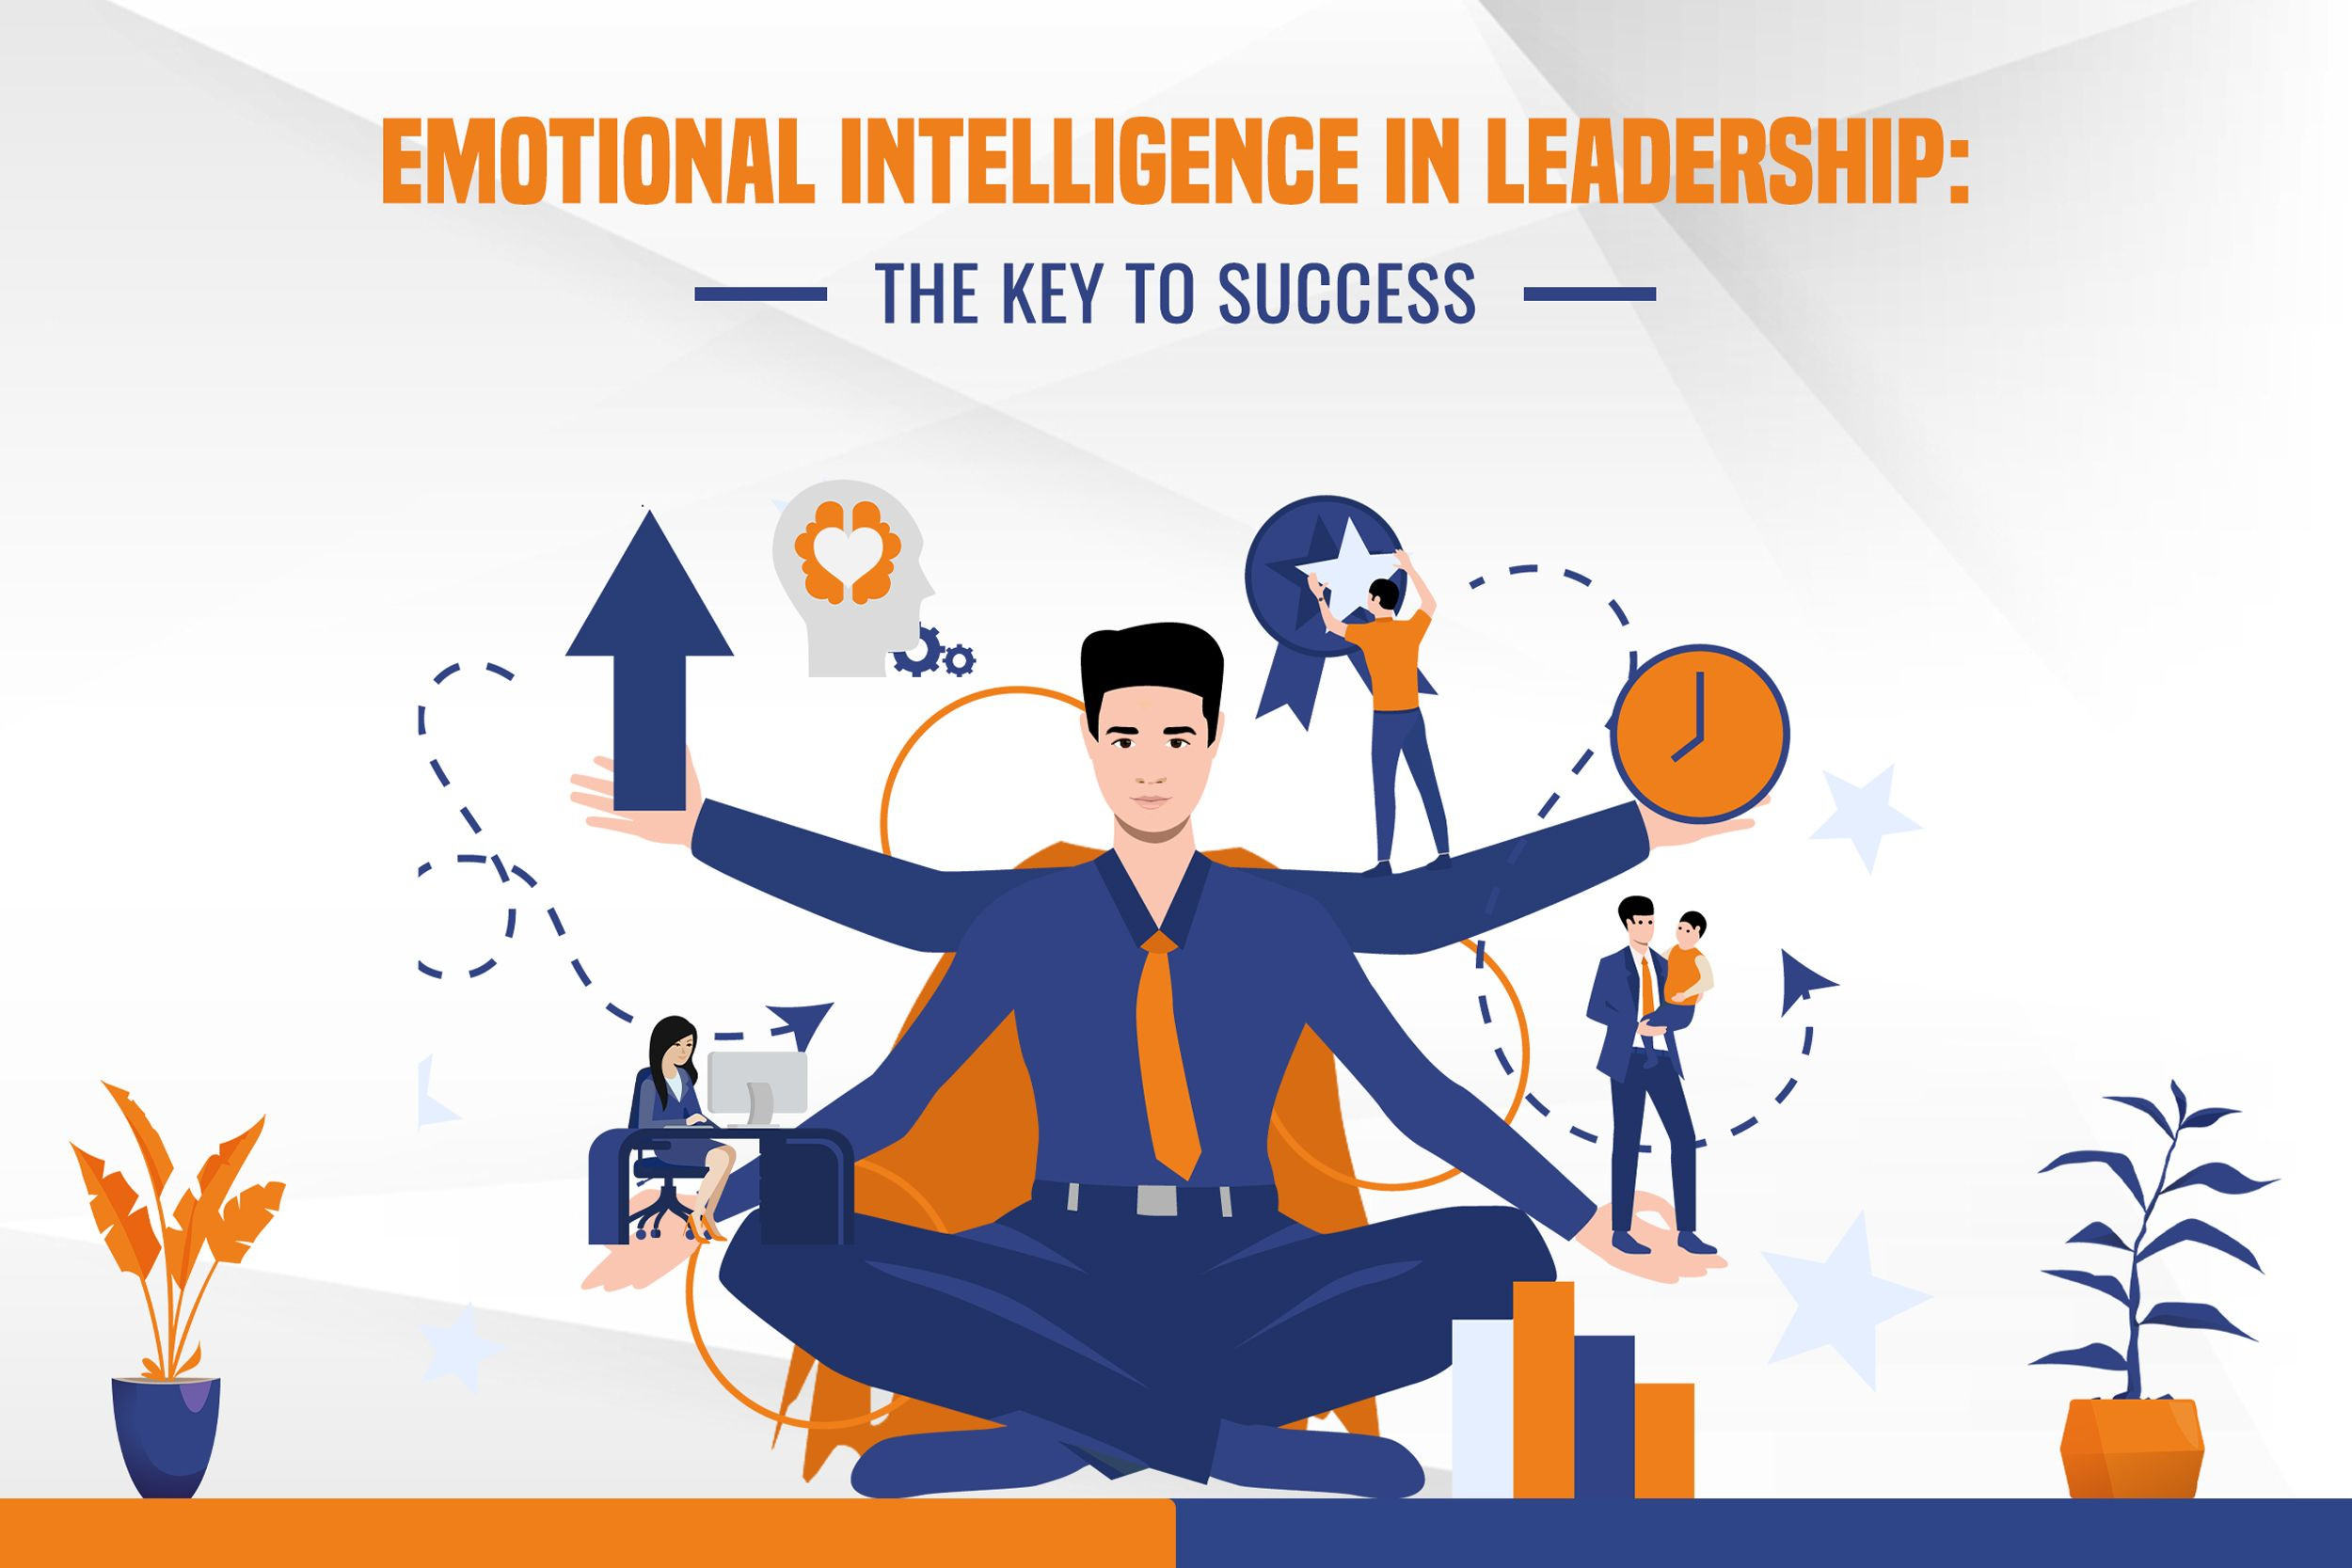 research about emotional intelligence and leadership concludes that